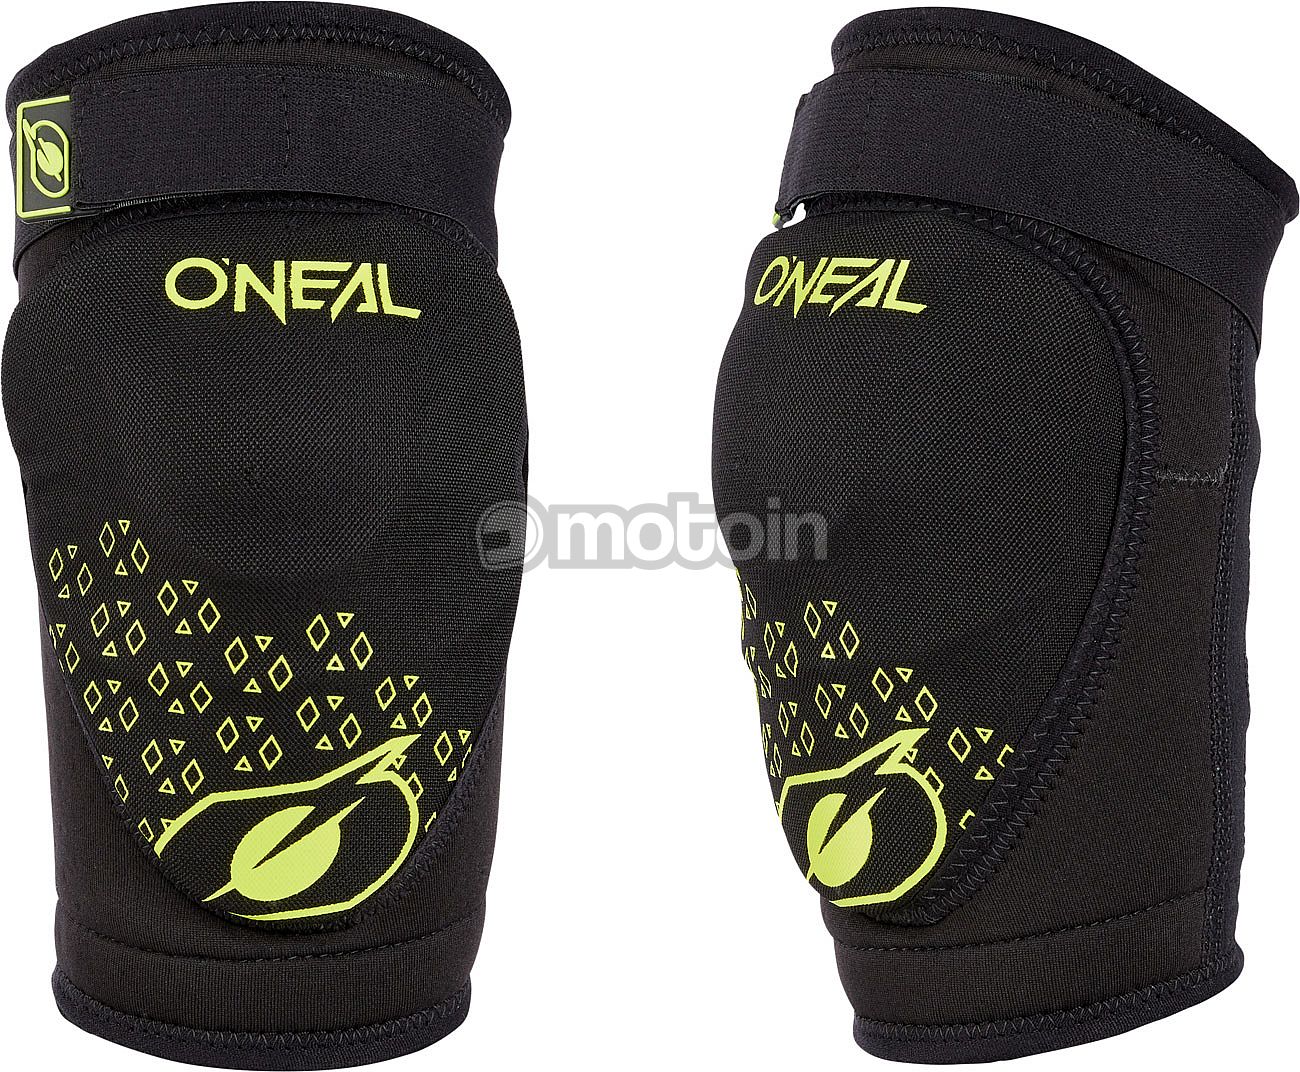 ONeal Dirt S23, knee protectors Level-1 youth